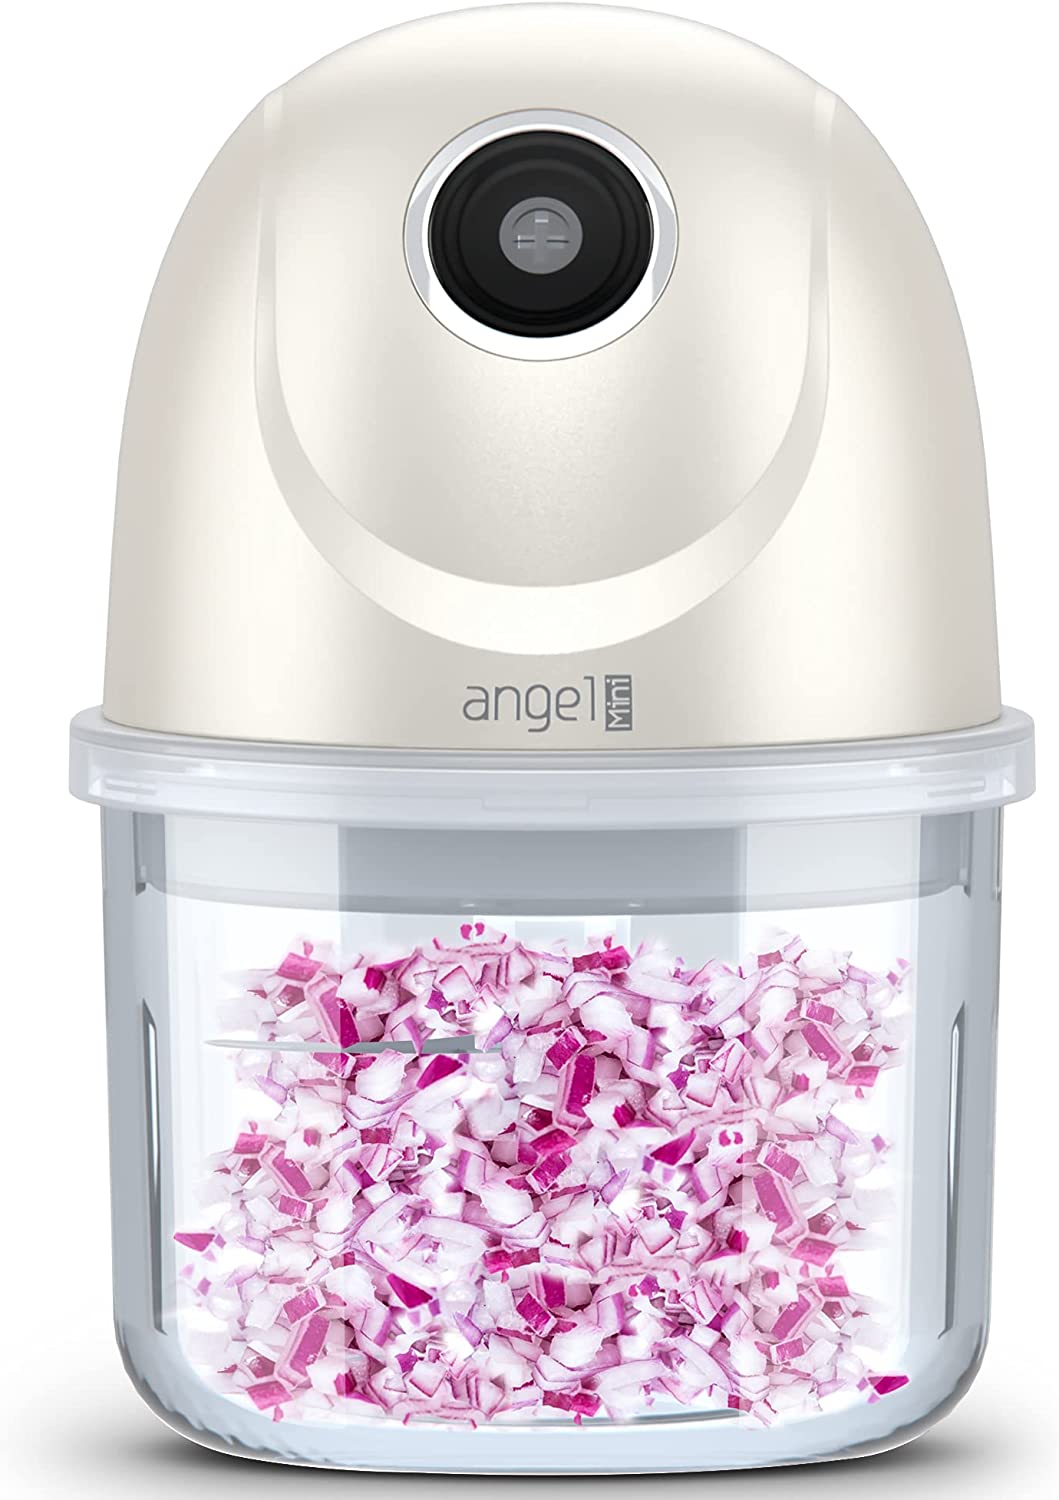 Electric Kitchen Chopper, 200 ml Chopping in 3 Seconds, Mini Angel Wireless Onion Cutter USB Charging, Suitable for Onion / Fruit / Nuts / Meat / Baby Food